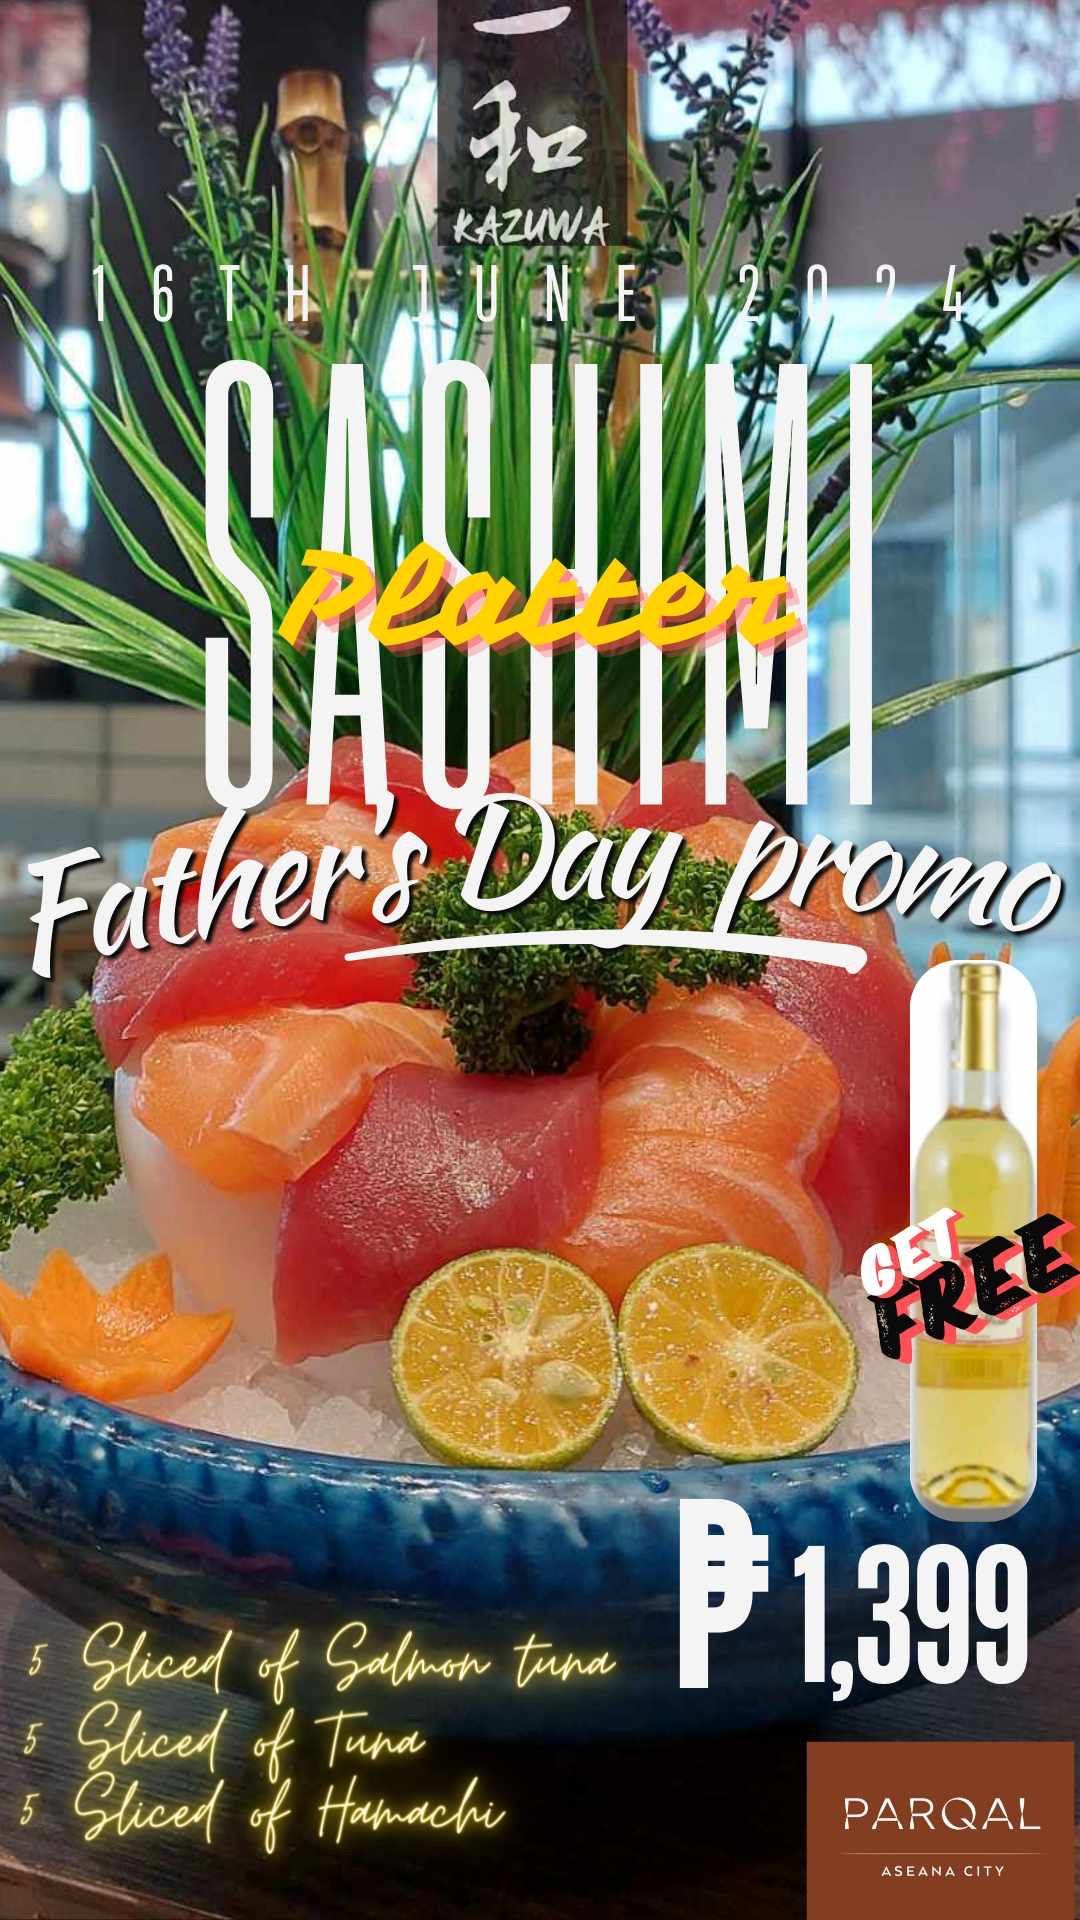 Father's Day Special at kazuwa parqal